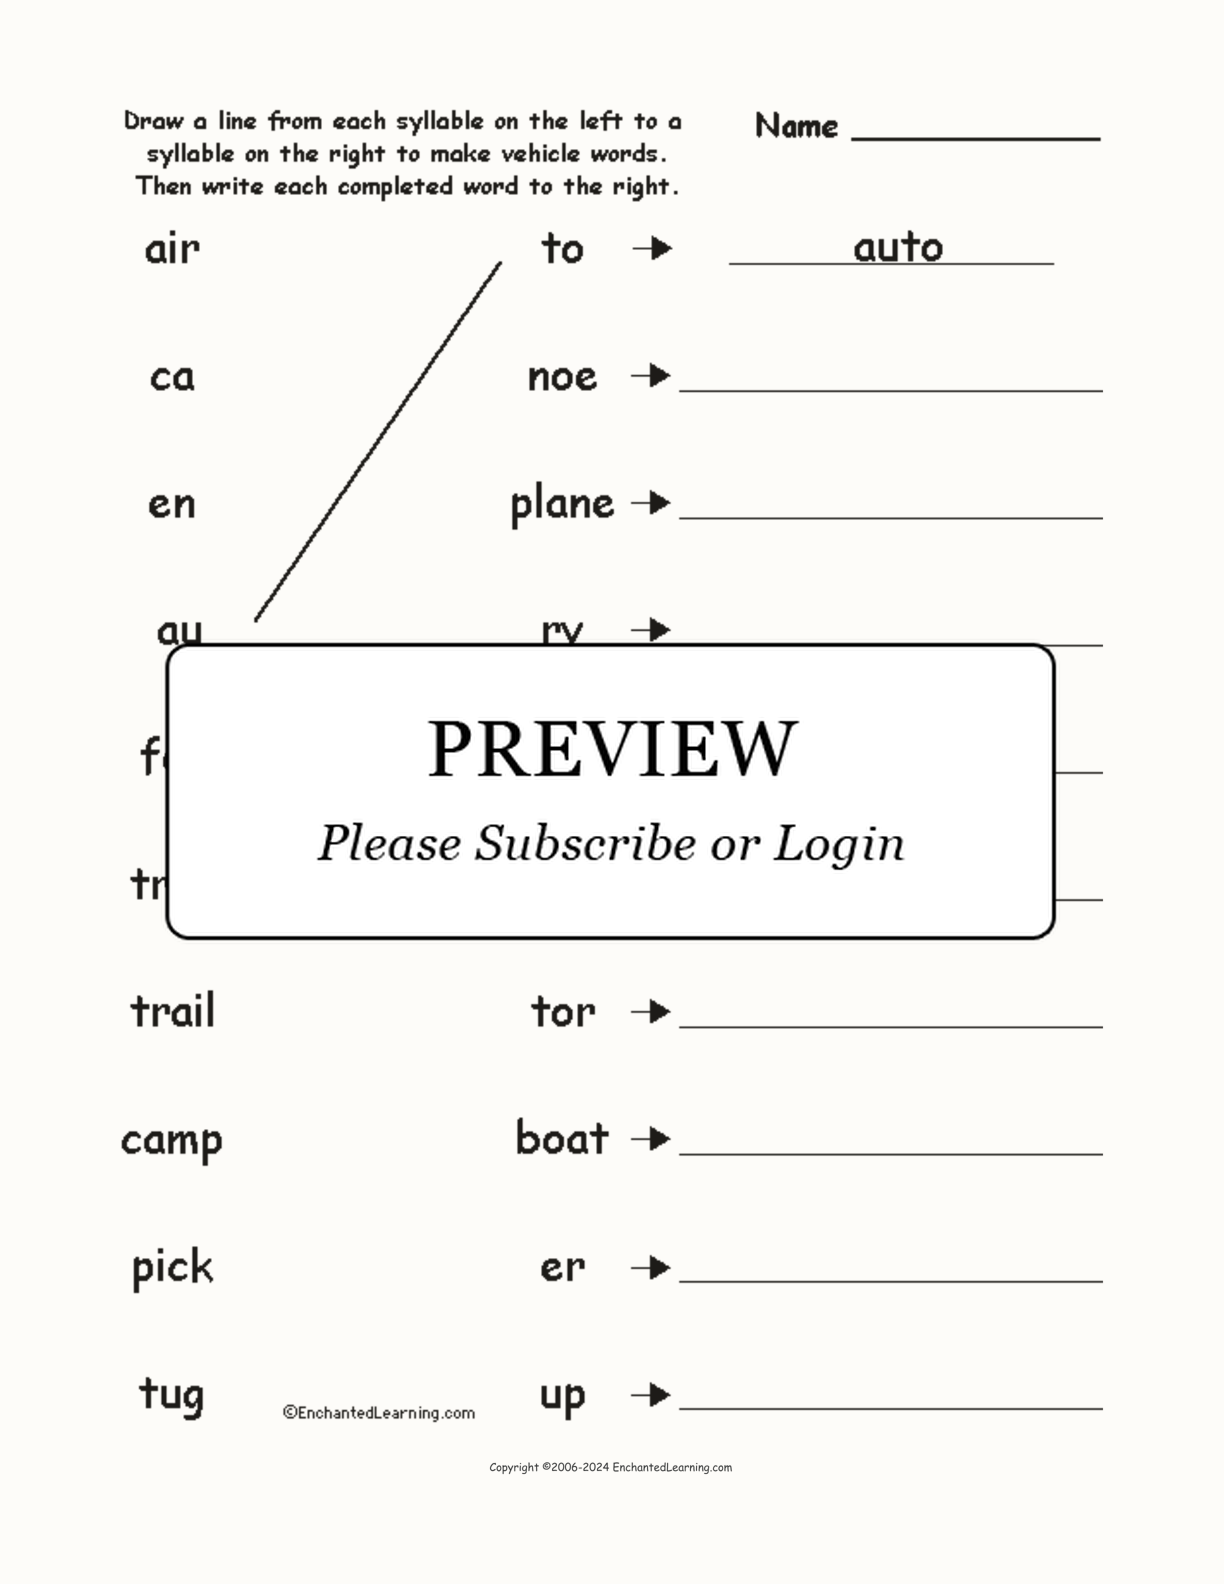 Match the Syllables: Vehicle Words interactive worksheet page 1